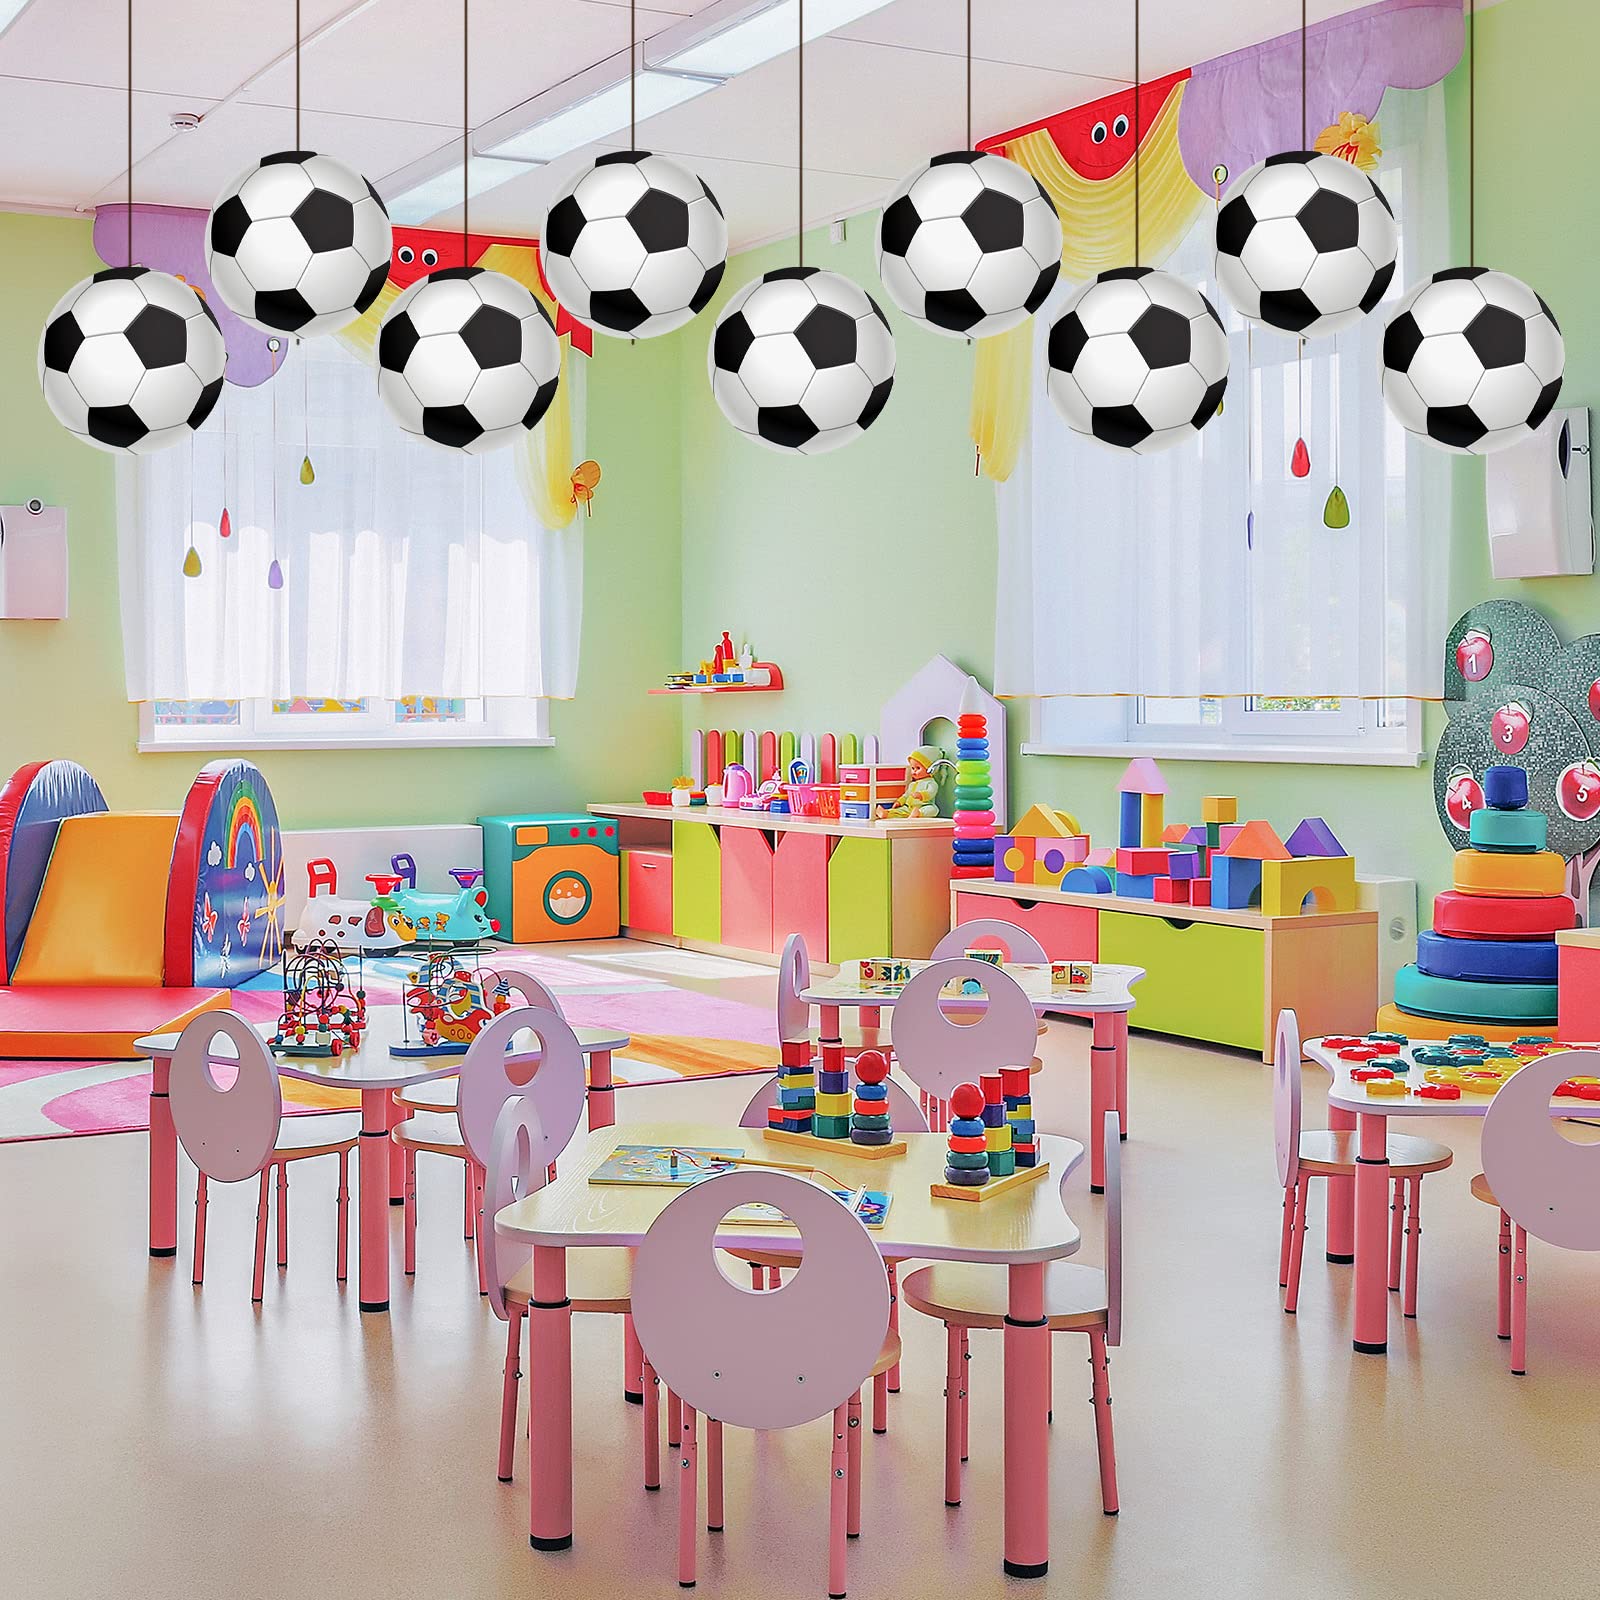 Yexiya 32 Pcs Soccer Ball Cutout Paper Soccer Party Decorations Soccer Party Favor Football Banner Bulletin Board Sports Theme Party Supplies with Glue Point for Classroom Boys Soccer Fans Birthday